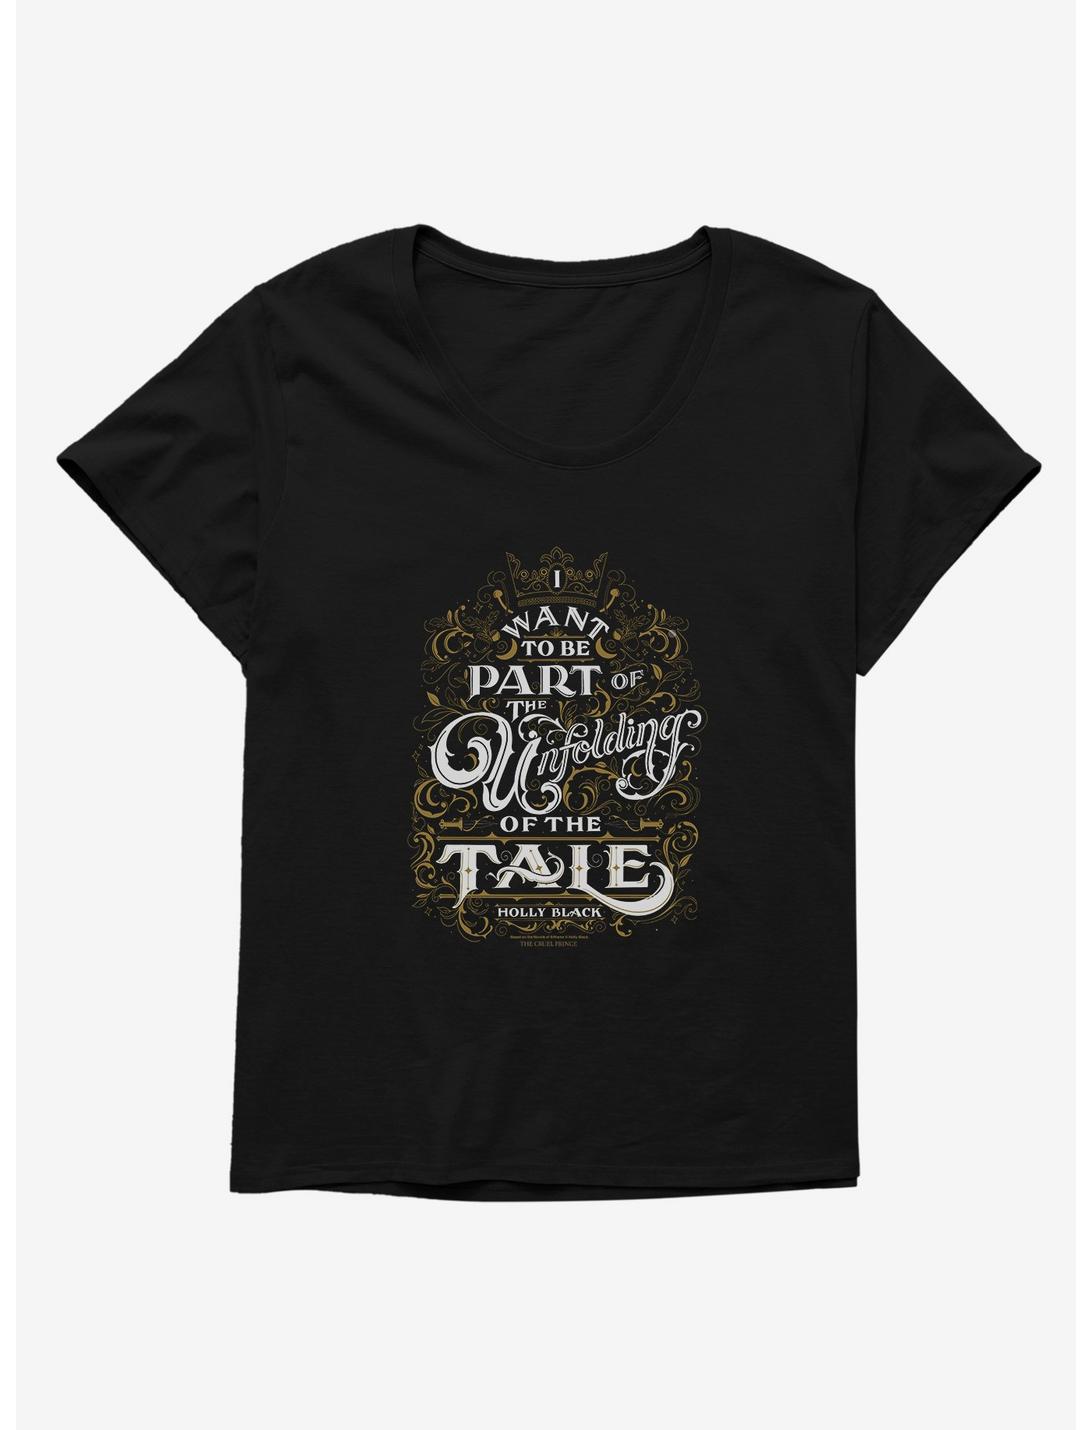 The Cruel Prince Sinister Enchantment Collection: Unfolding Of The Tale Womens T-Shirt Plus Size , BLACK, hi-res